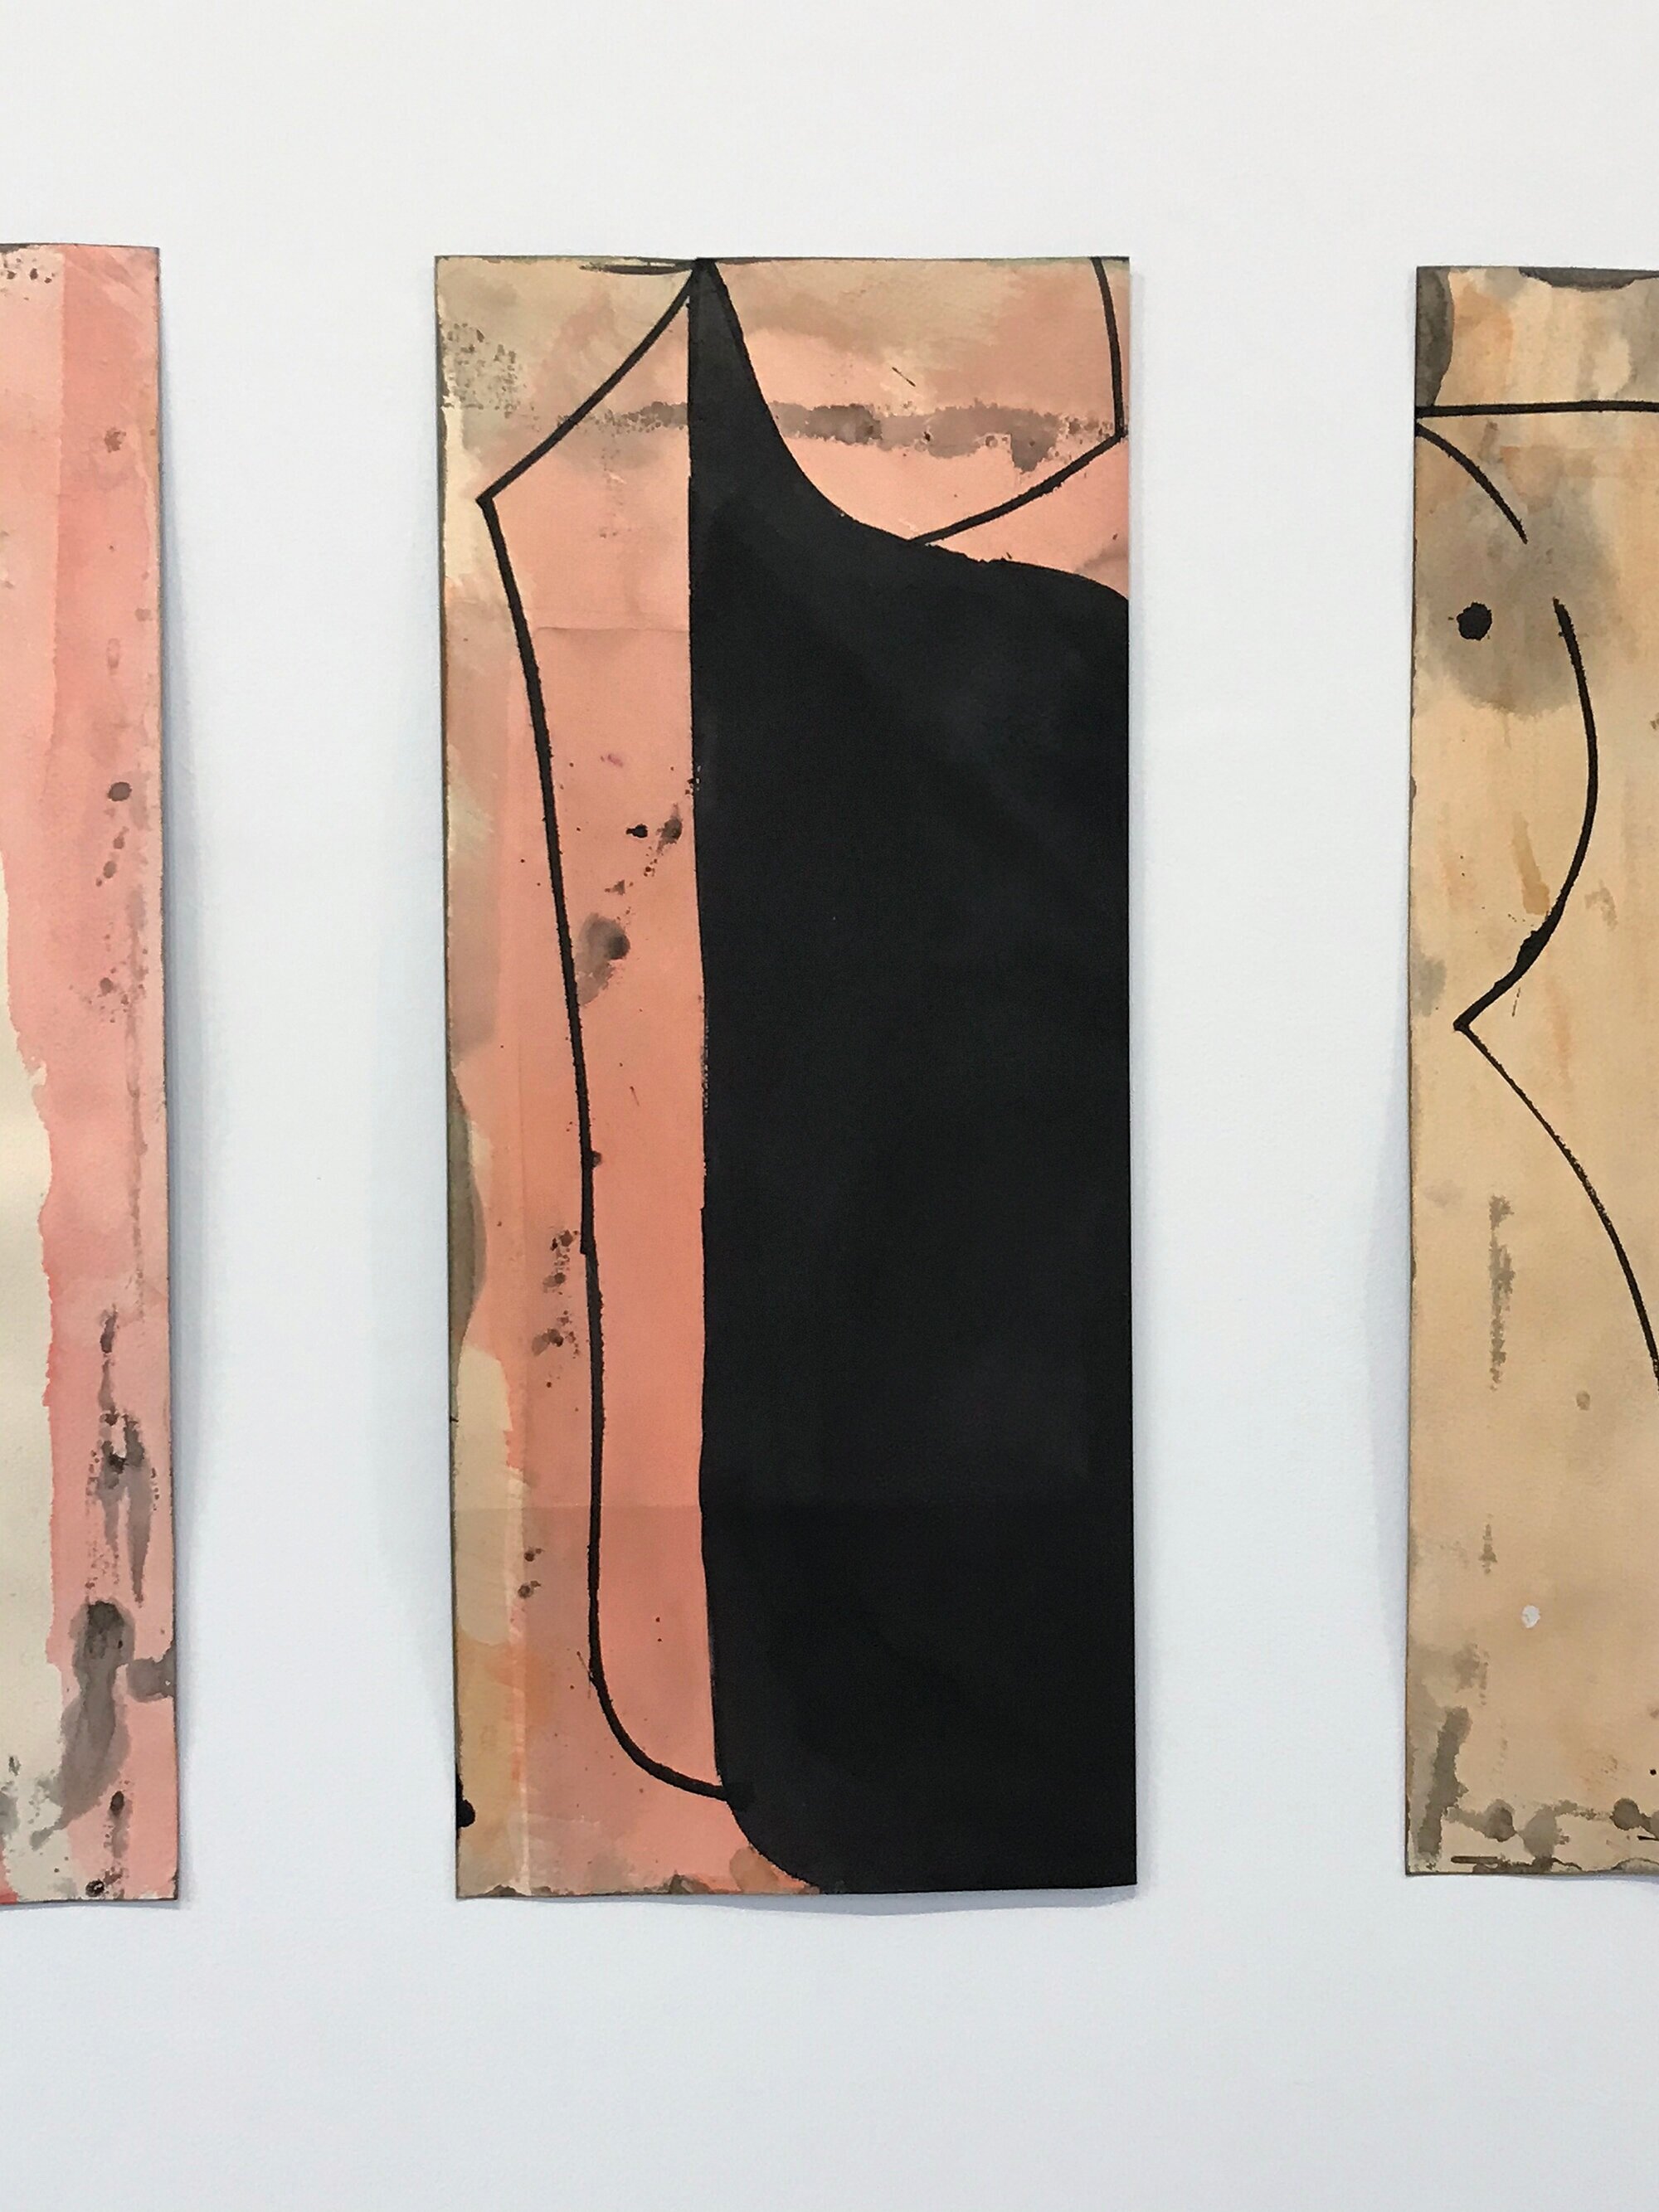 Vincent Hawkins, 'Wing 2' 2019, 56x23cm, ink & watercolour on paper.